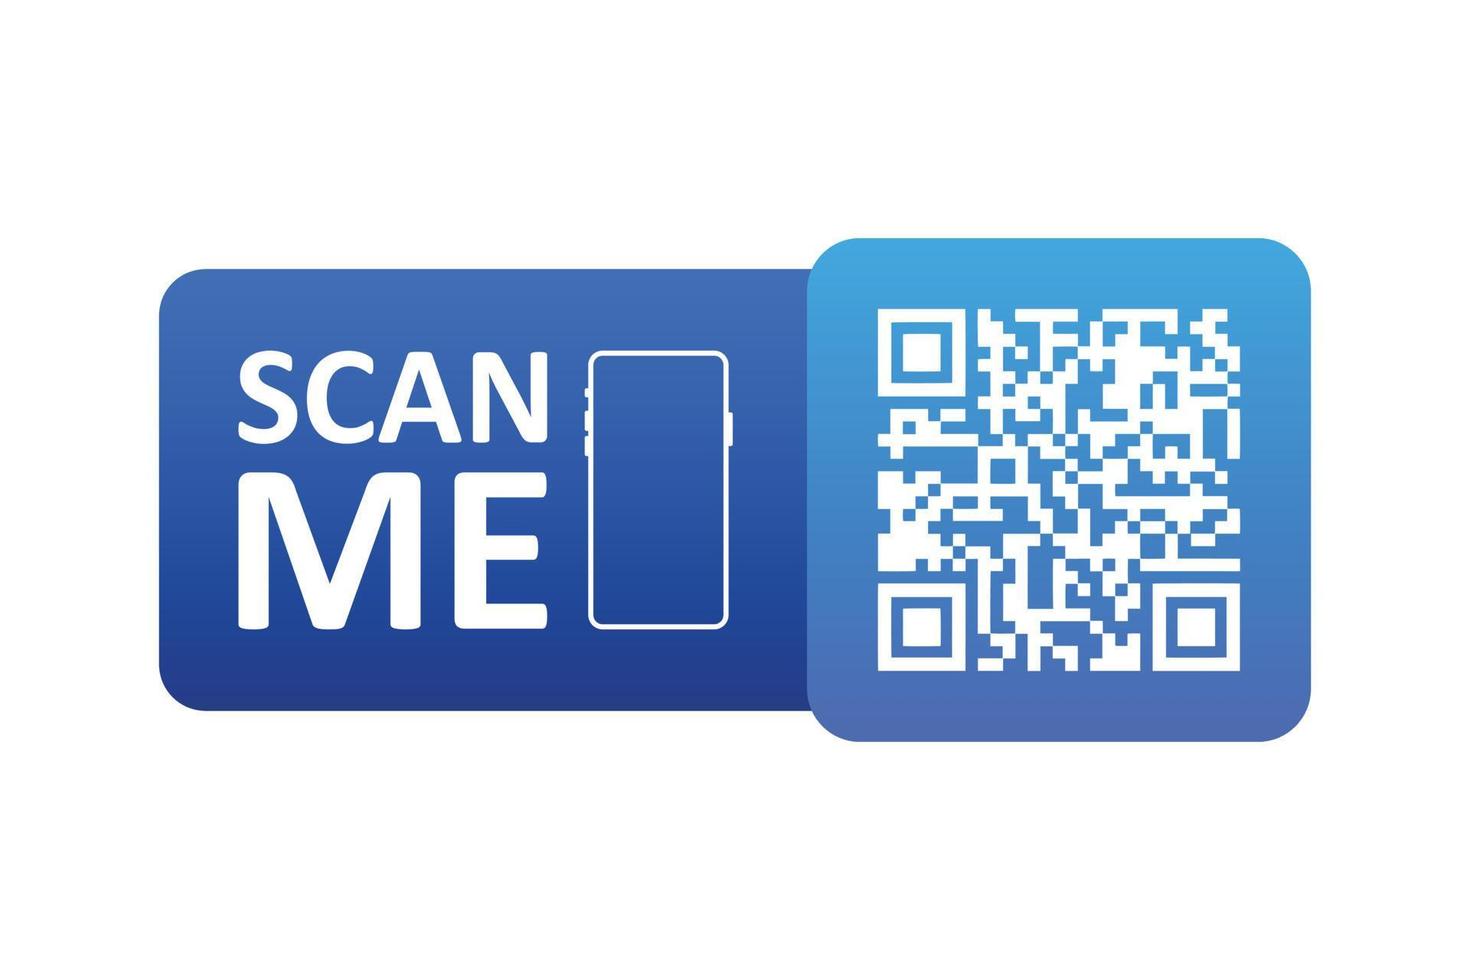 QR code scan icon in flat style. Barcode vector illustration on isolated background. Scanner reader sign business concept.